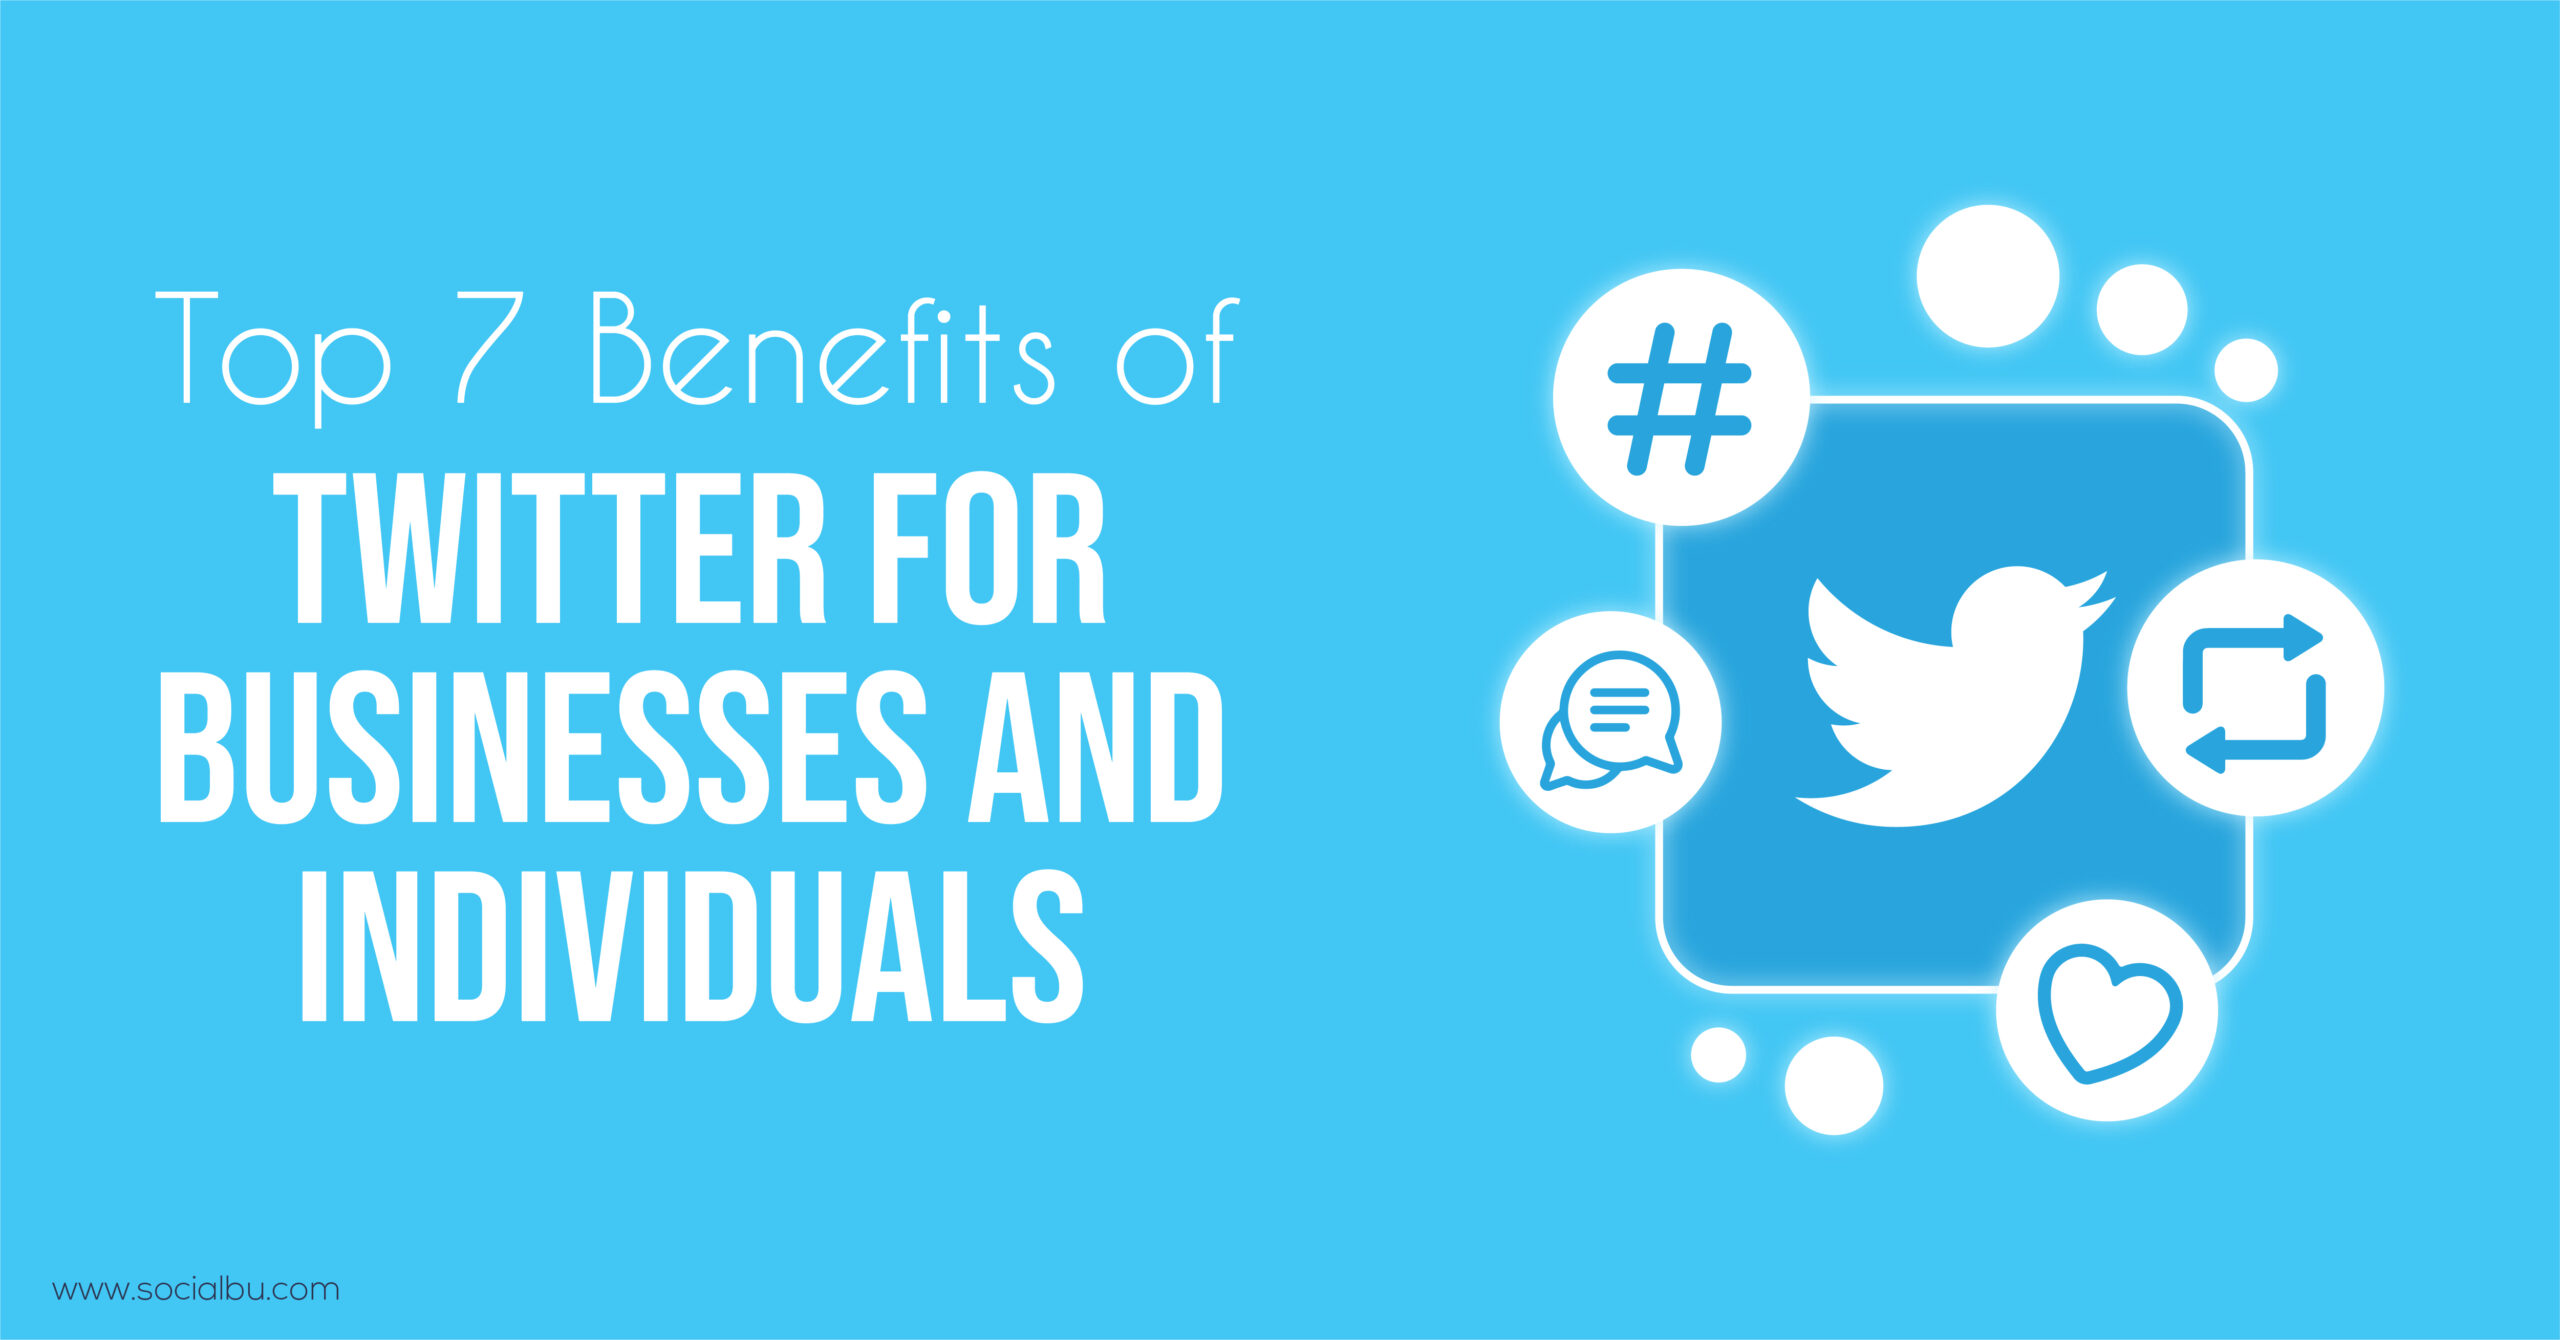 Twitter Spaces: How To Use It Effectively To Grow Your Brand